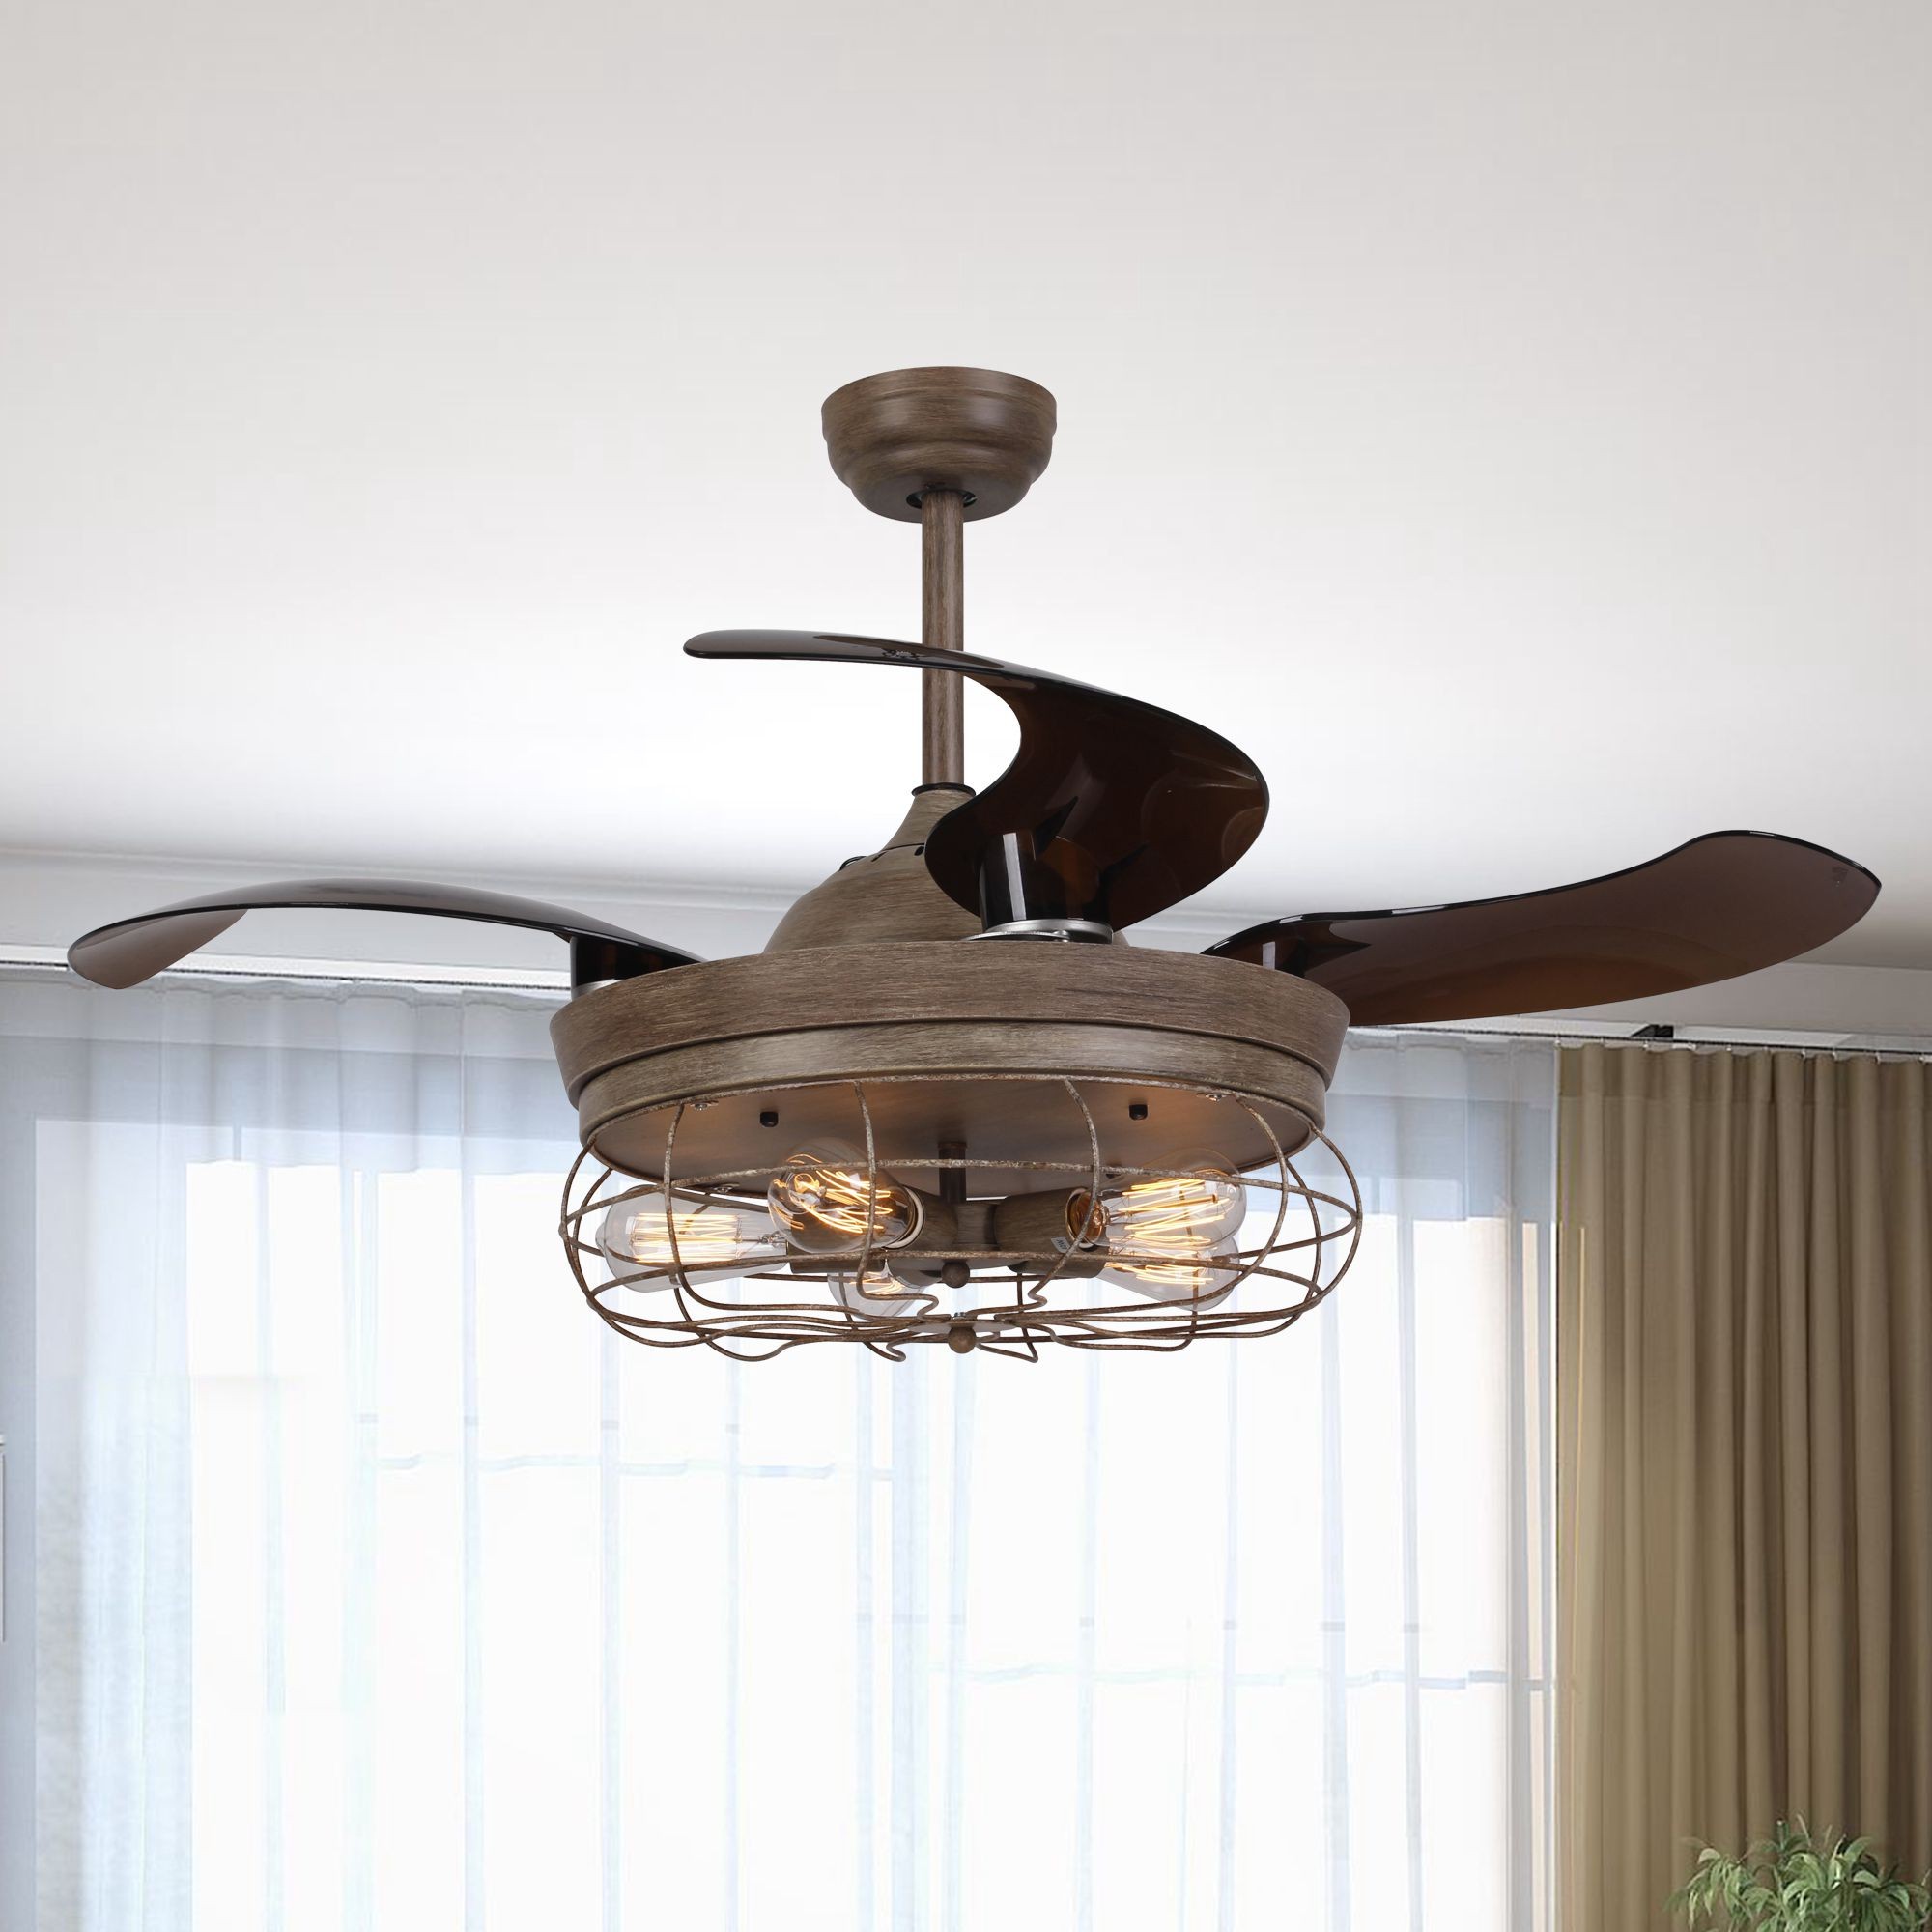 42 5 Benally 4 Blade Ceiling Fan With Remote Weathered Oak Wood